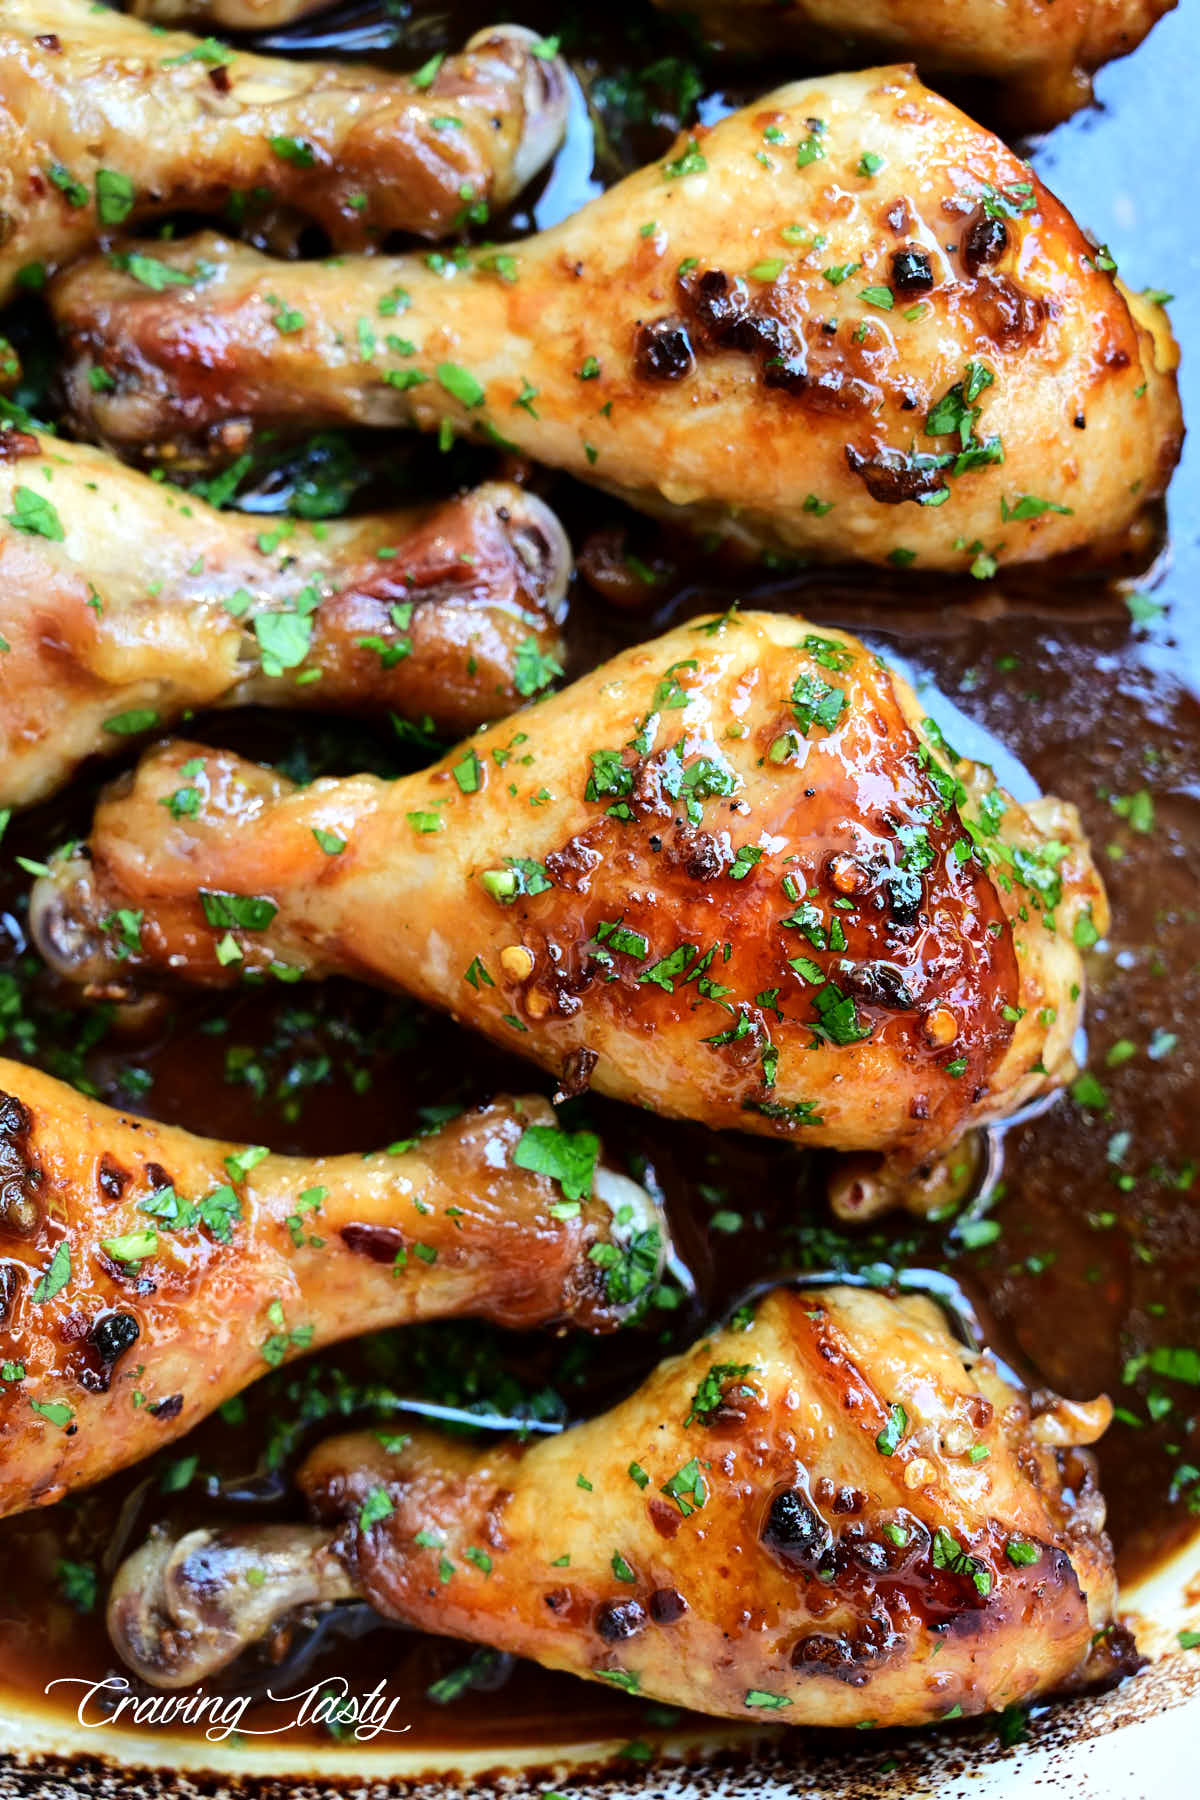 A large, juicy, crispy baked chicken drumstick, inside a pan with sauce, surrounded by partial chicken legs.